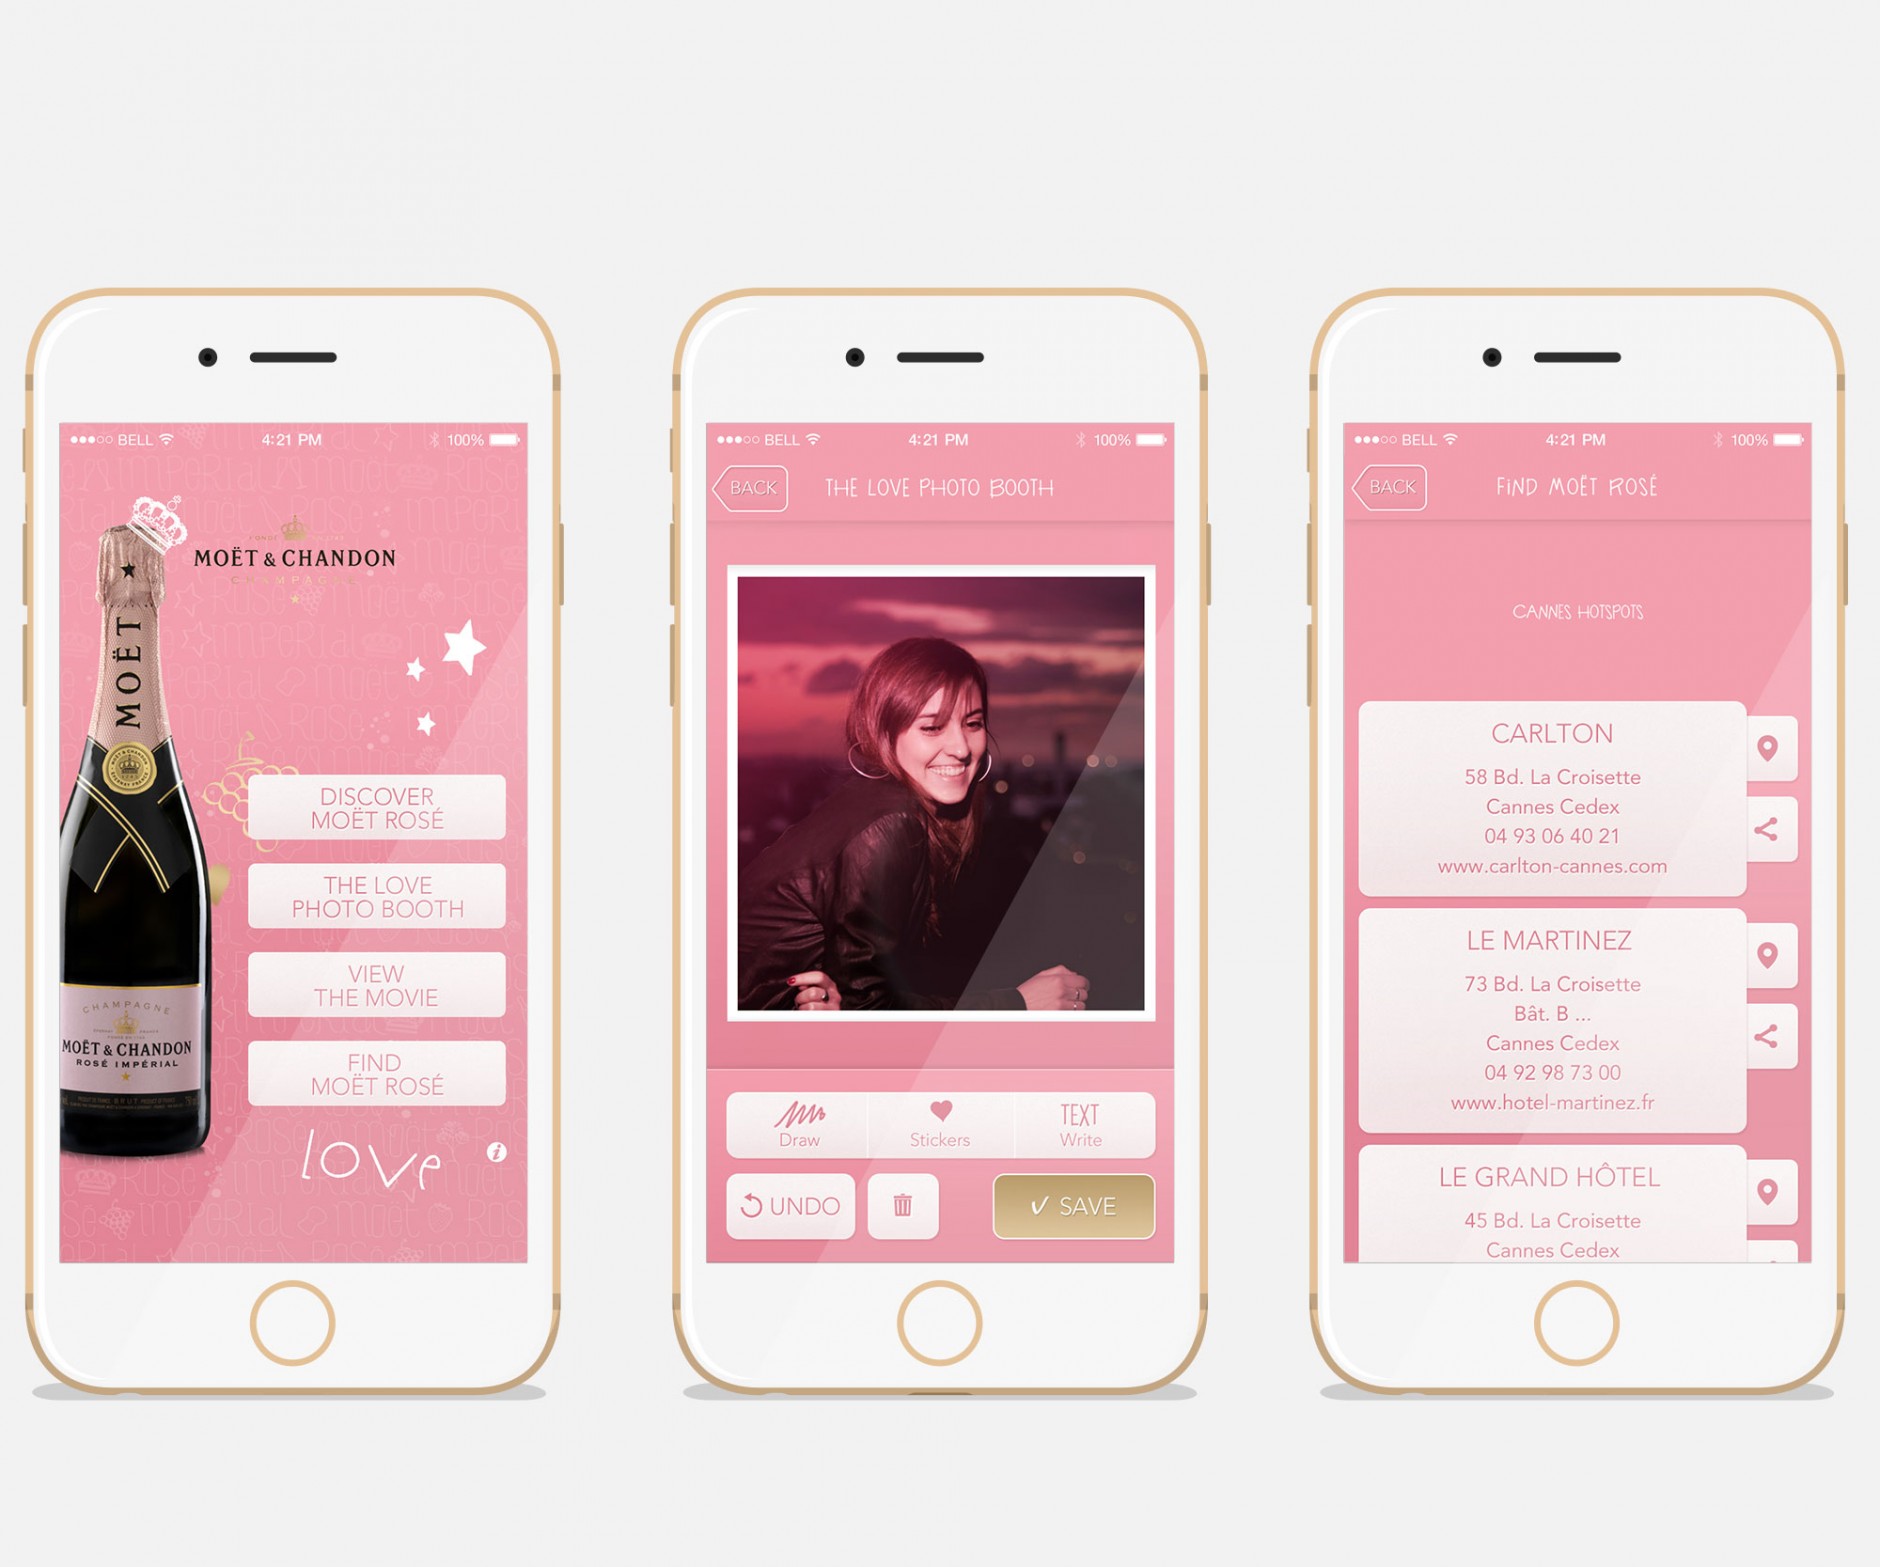 Moet & chandon champagne luxe ui design iphone app - mael burgy